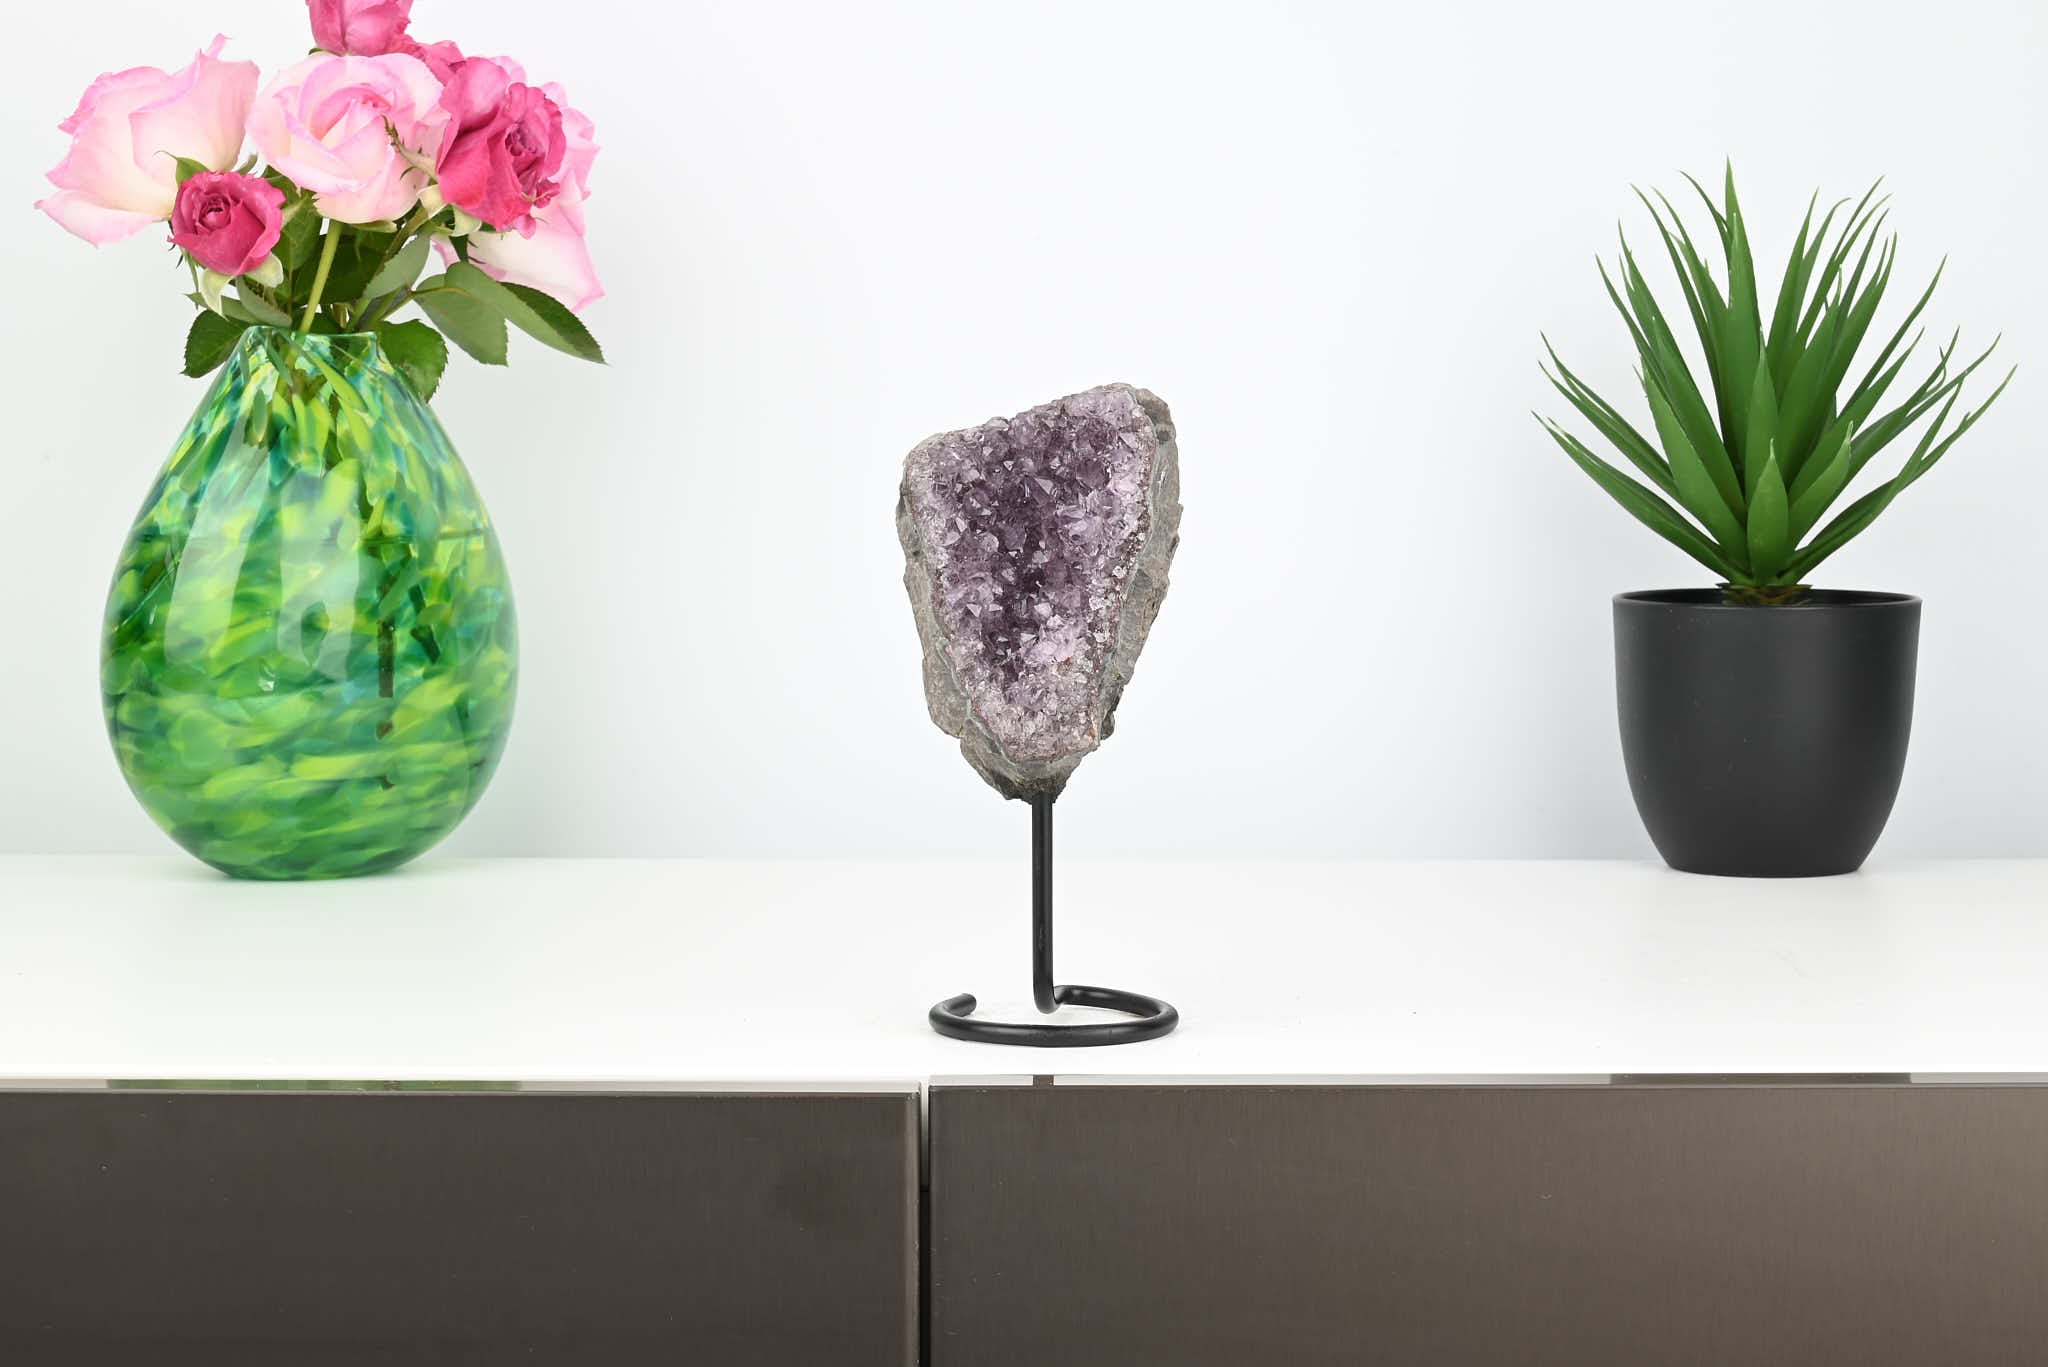 Amethyst Cluster on Stand - Small 17cm Tall - #CLUSAM-63030